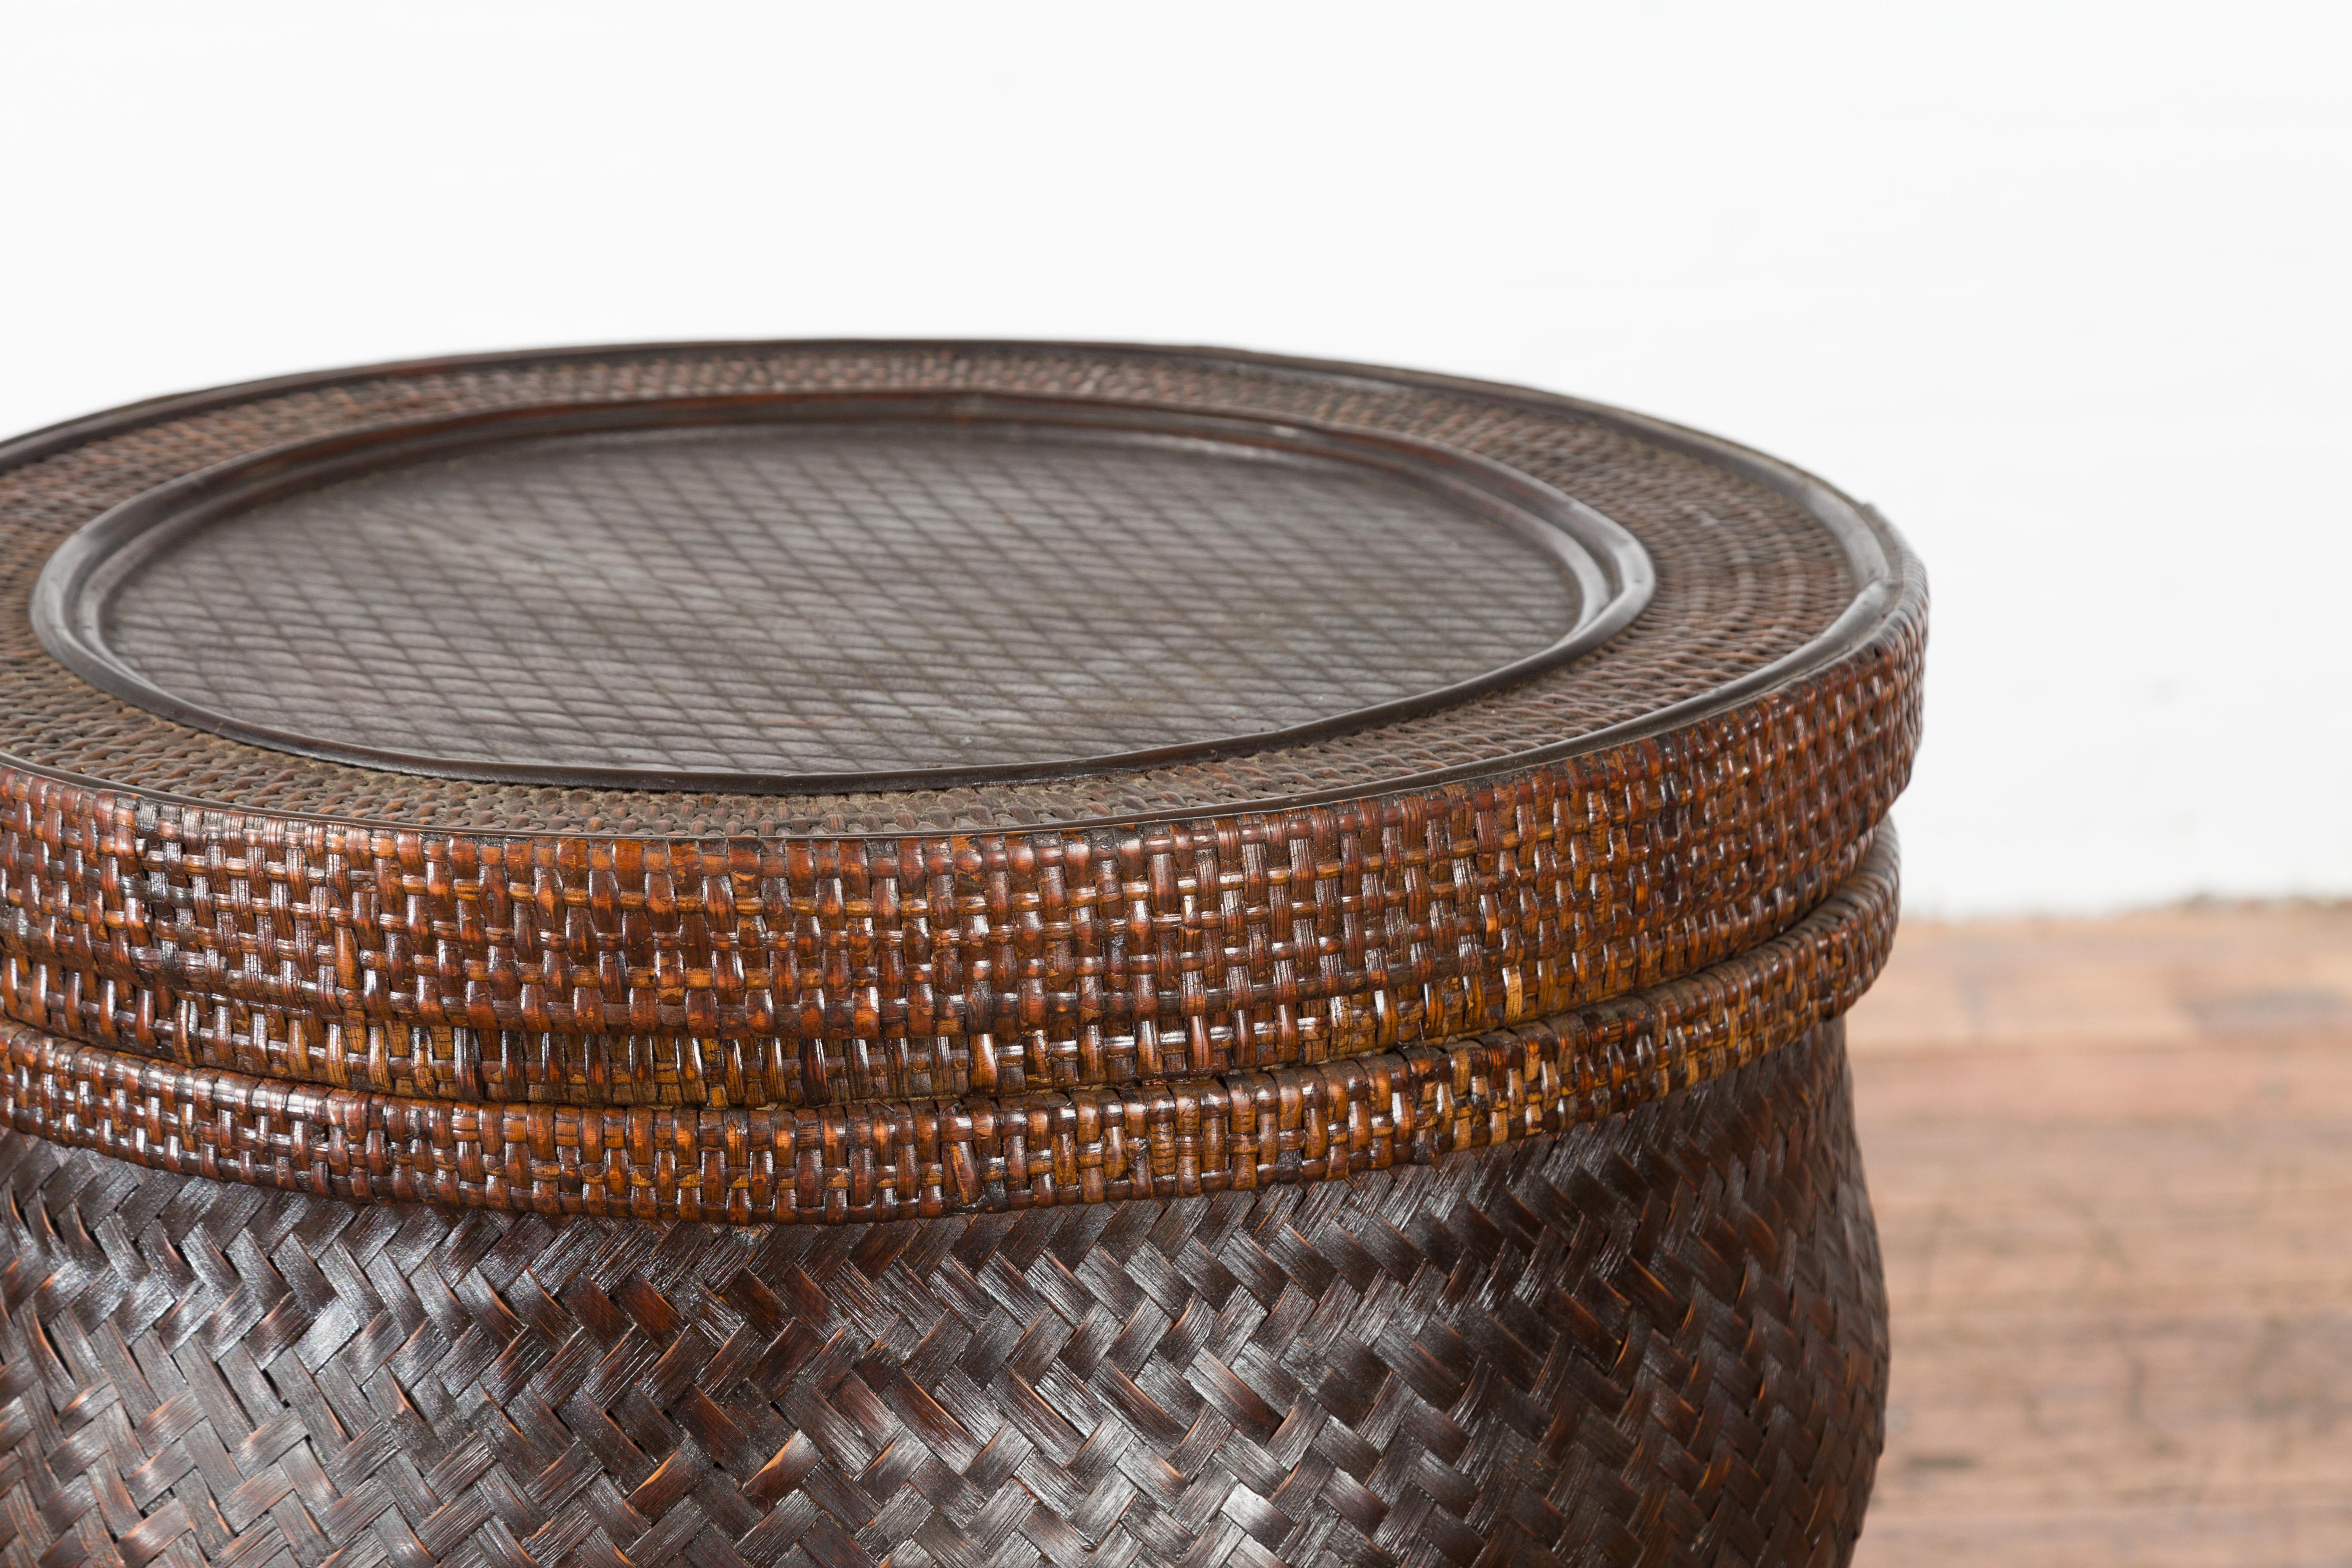 Chinese Vintage Hand-Stitched Rattan Basket with Round Top and Dark Patina For Sale 3